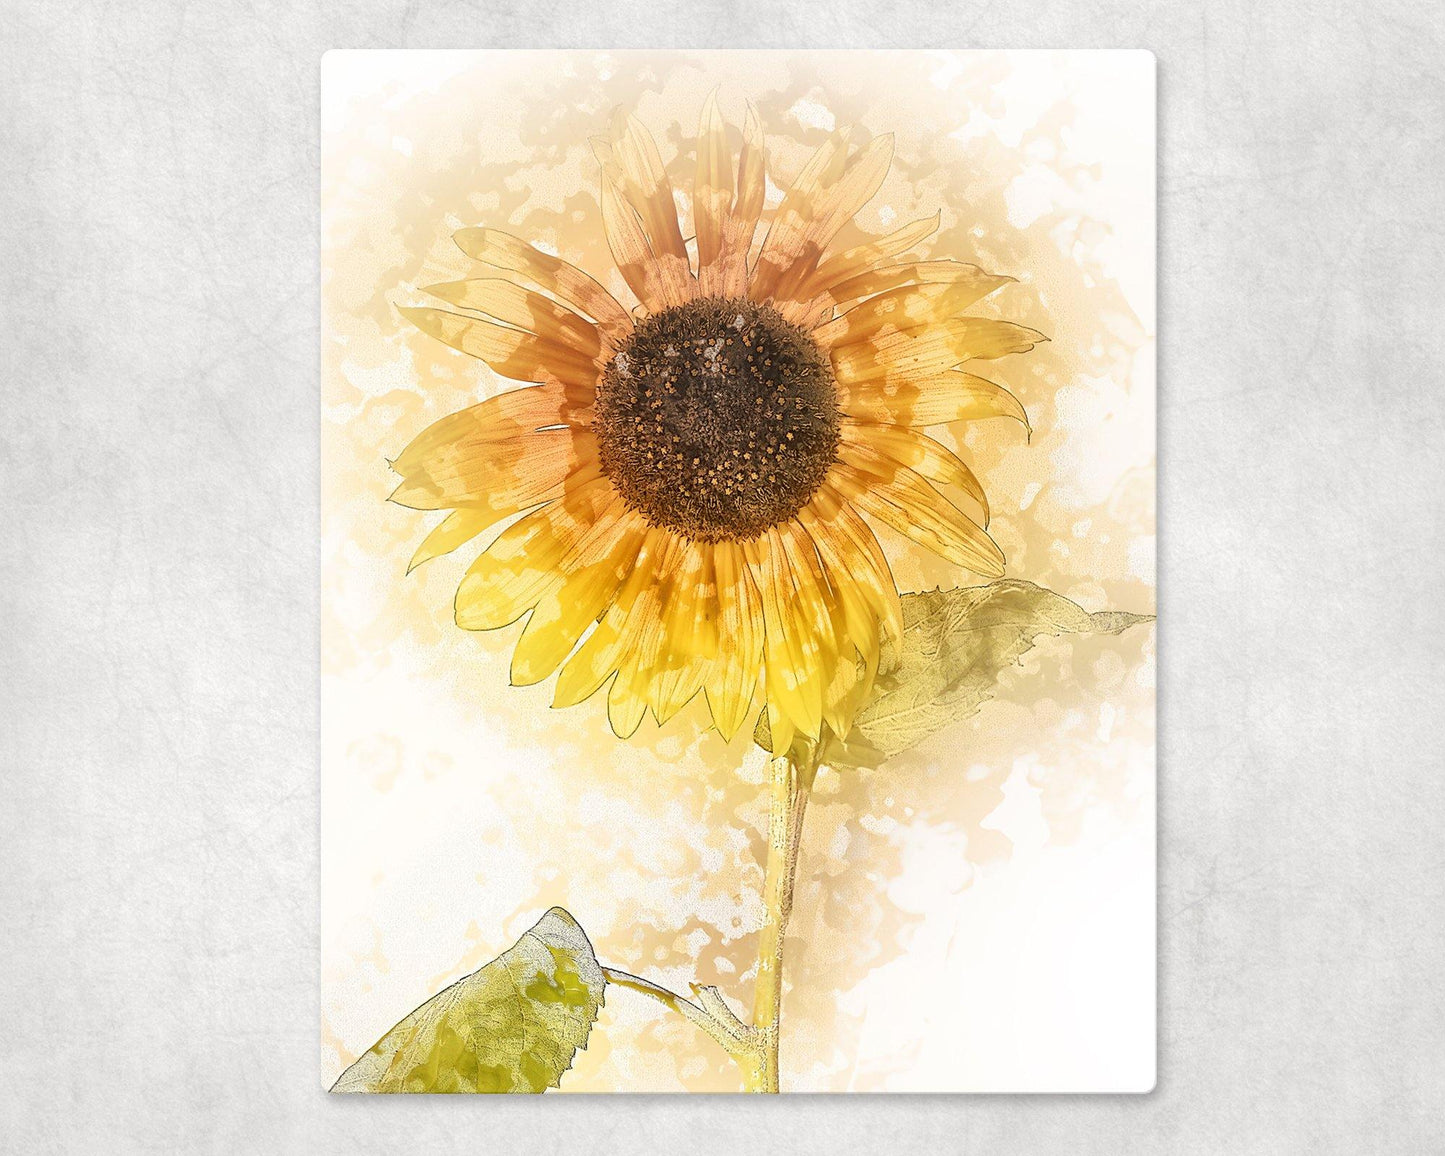 Watercolor Style Sunflower Metal Photo Panel - 8x10 - Schoppix Gifts